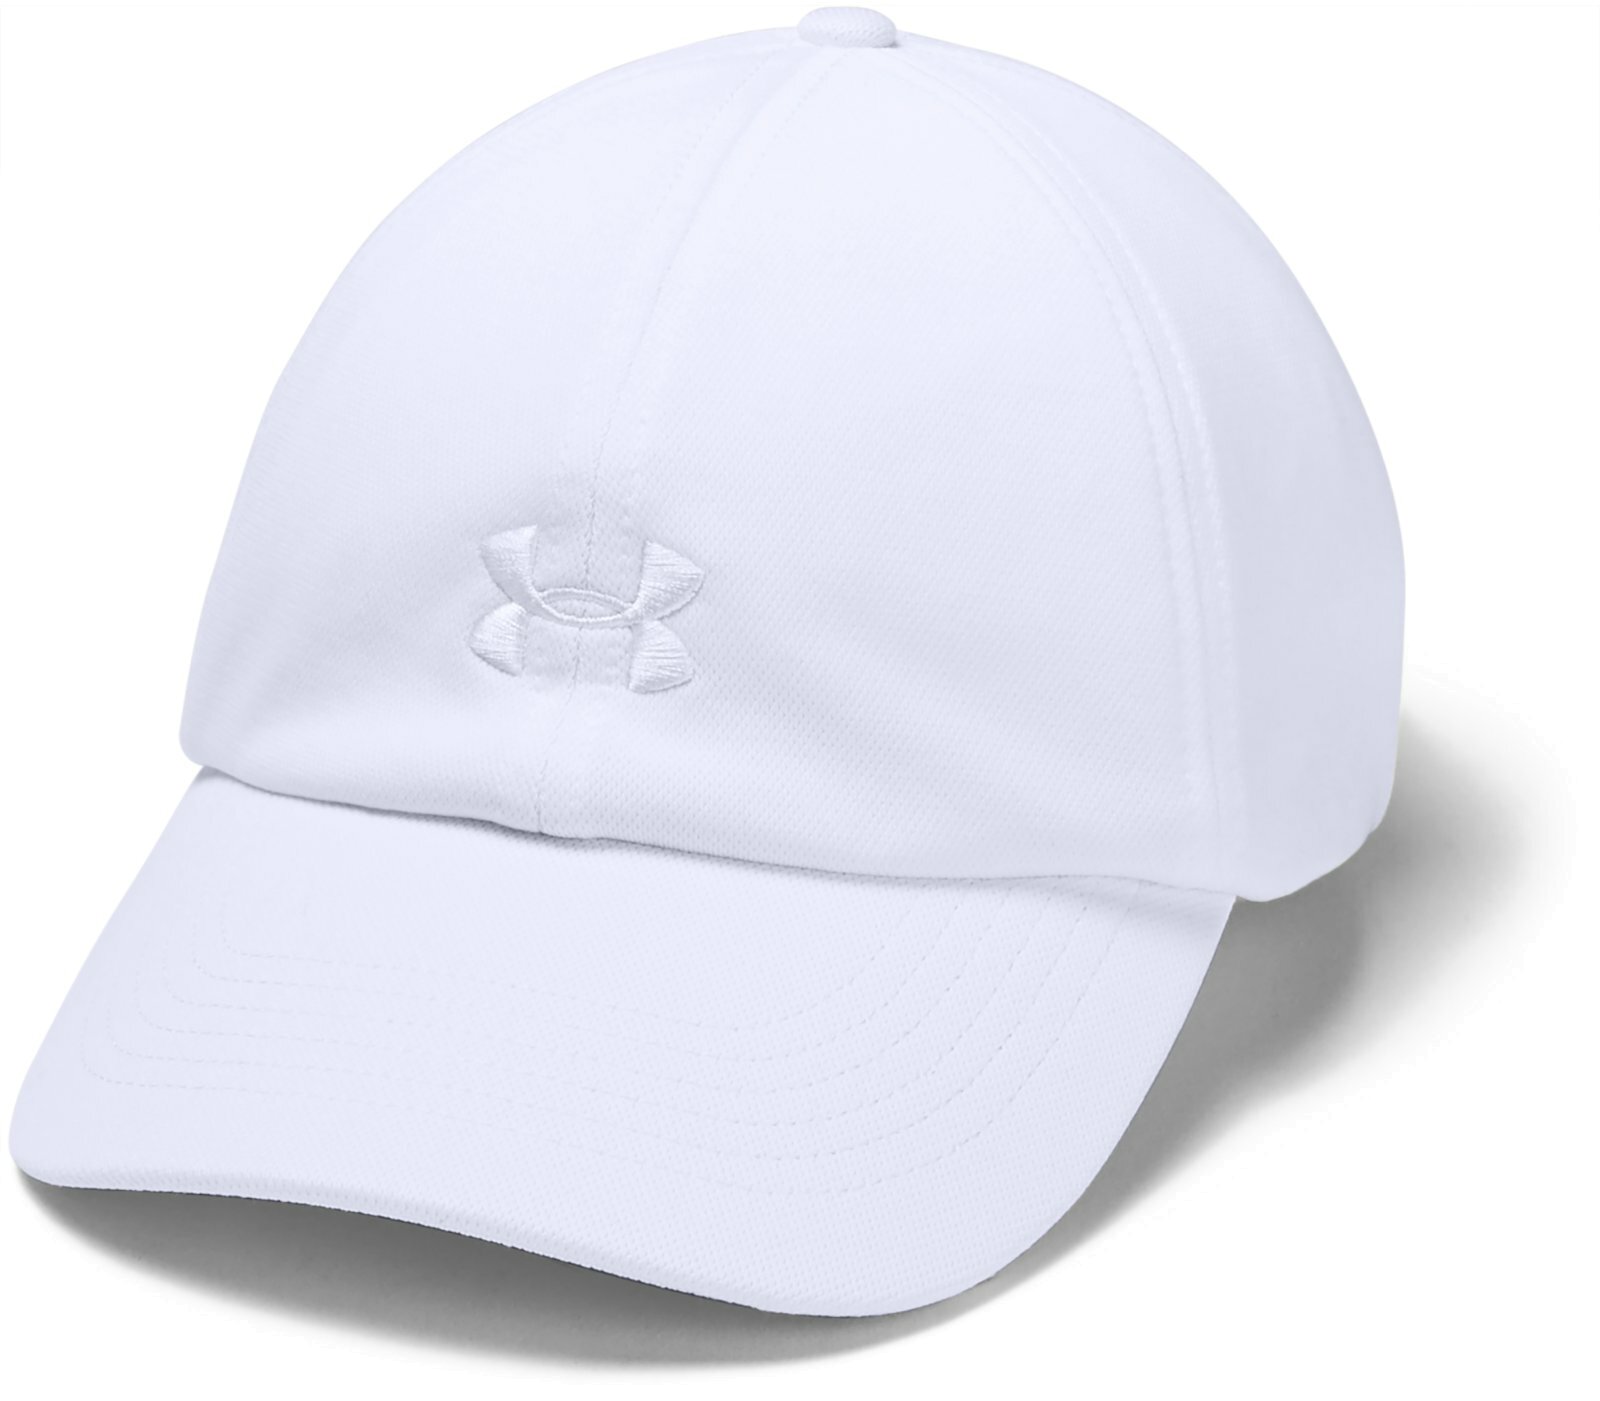 UNDER ARMOUR Кепка PLAY UP Артикул: 1351267